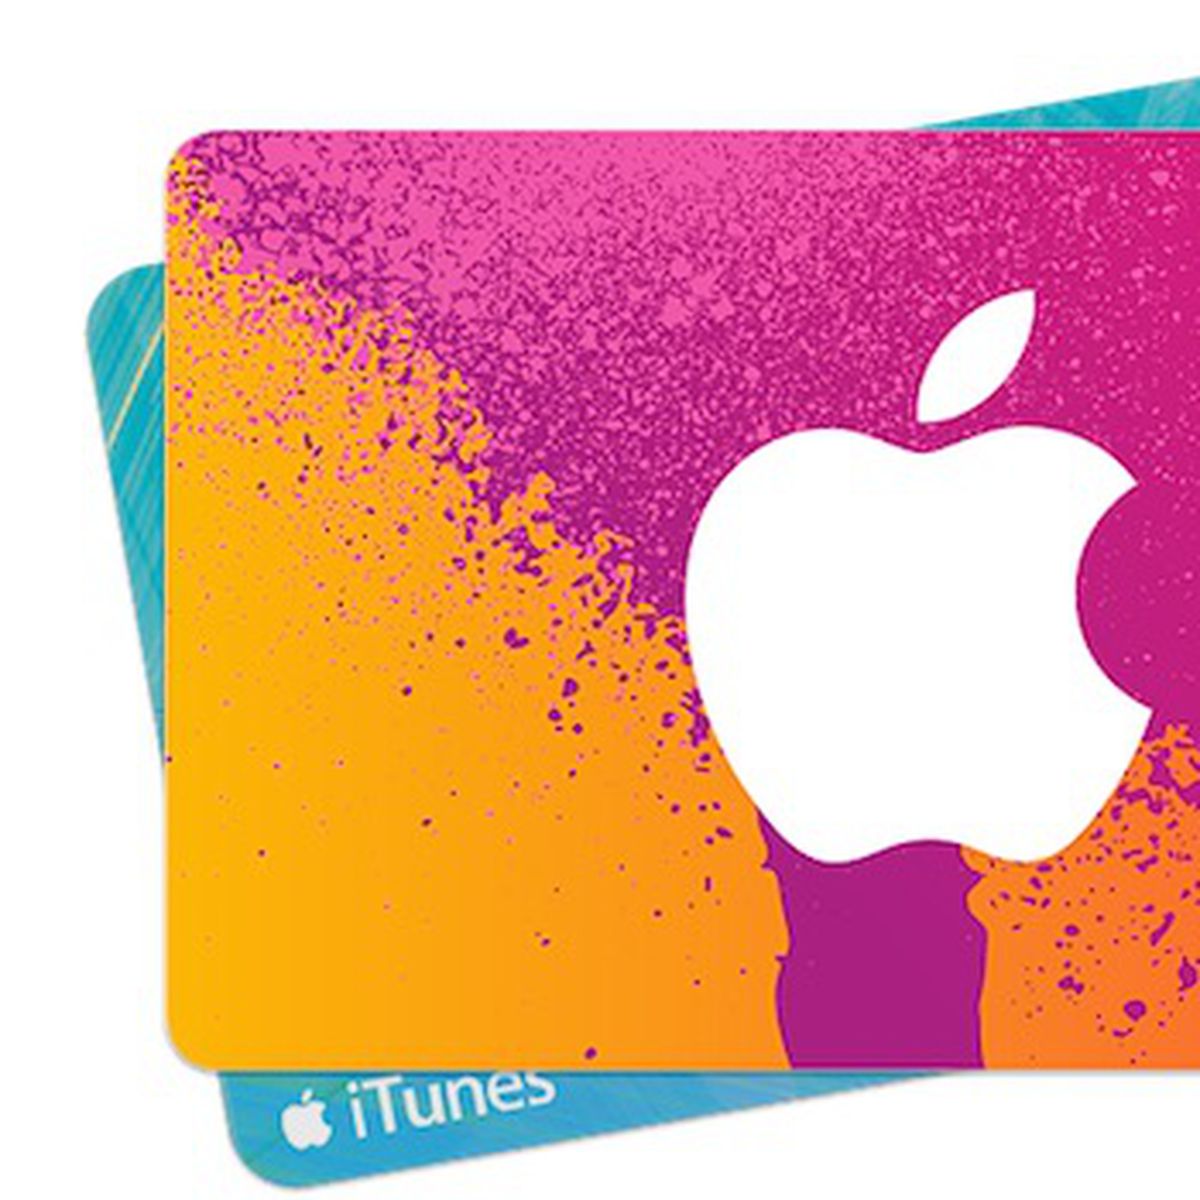 93 Trick How to use apple gift card for minecraft with Multiplayer Online